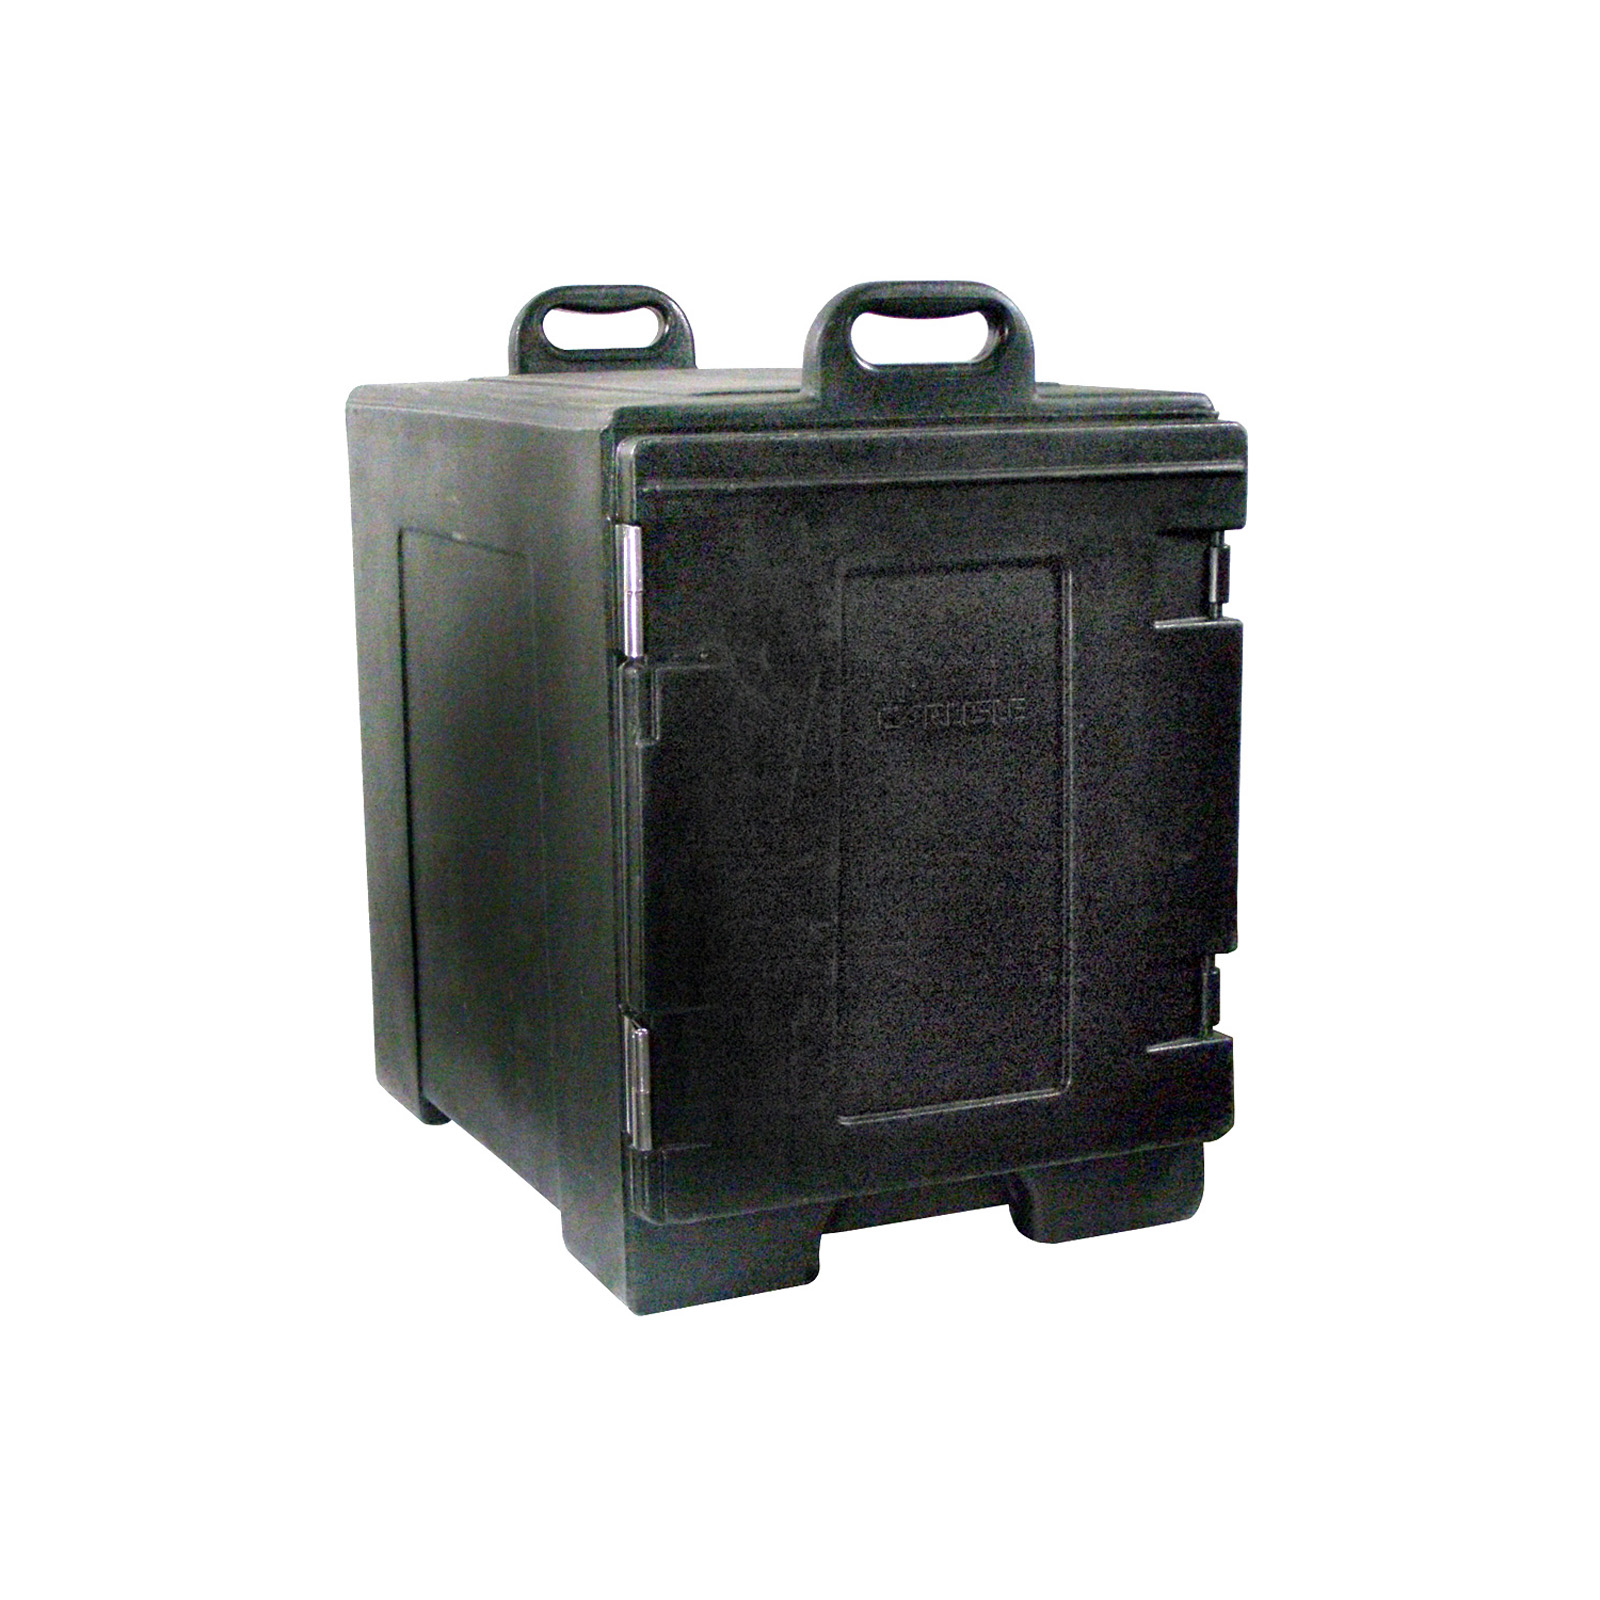 MINI CART FOR GN1/1 INSULATED BOX - Cool - The Insulated Box.Com